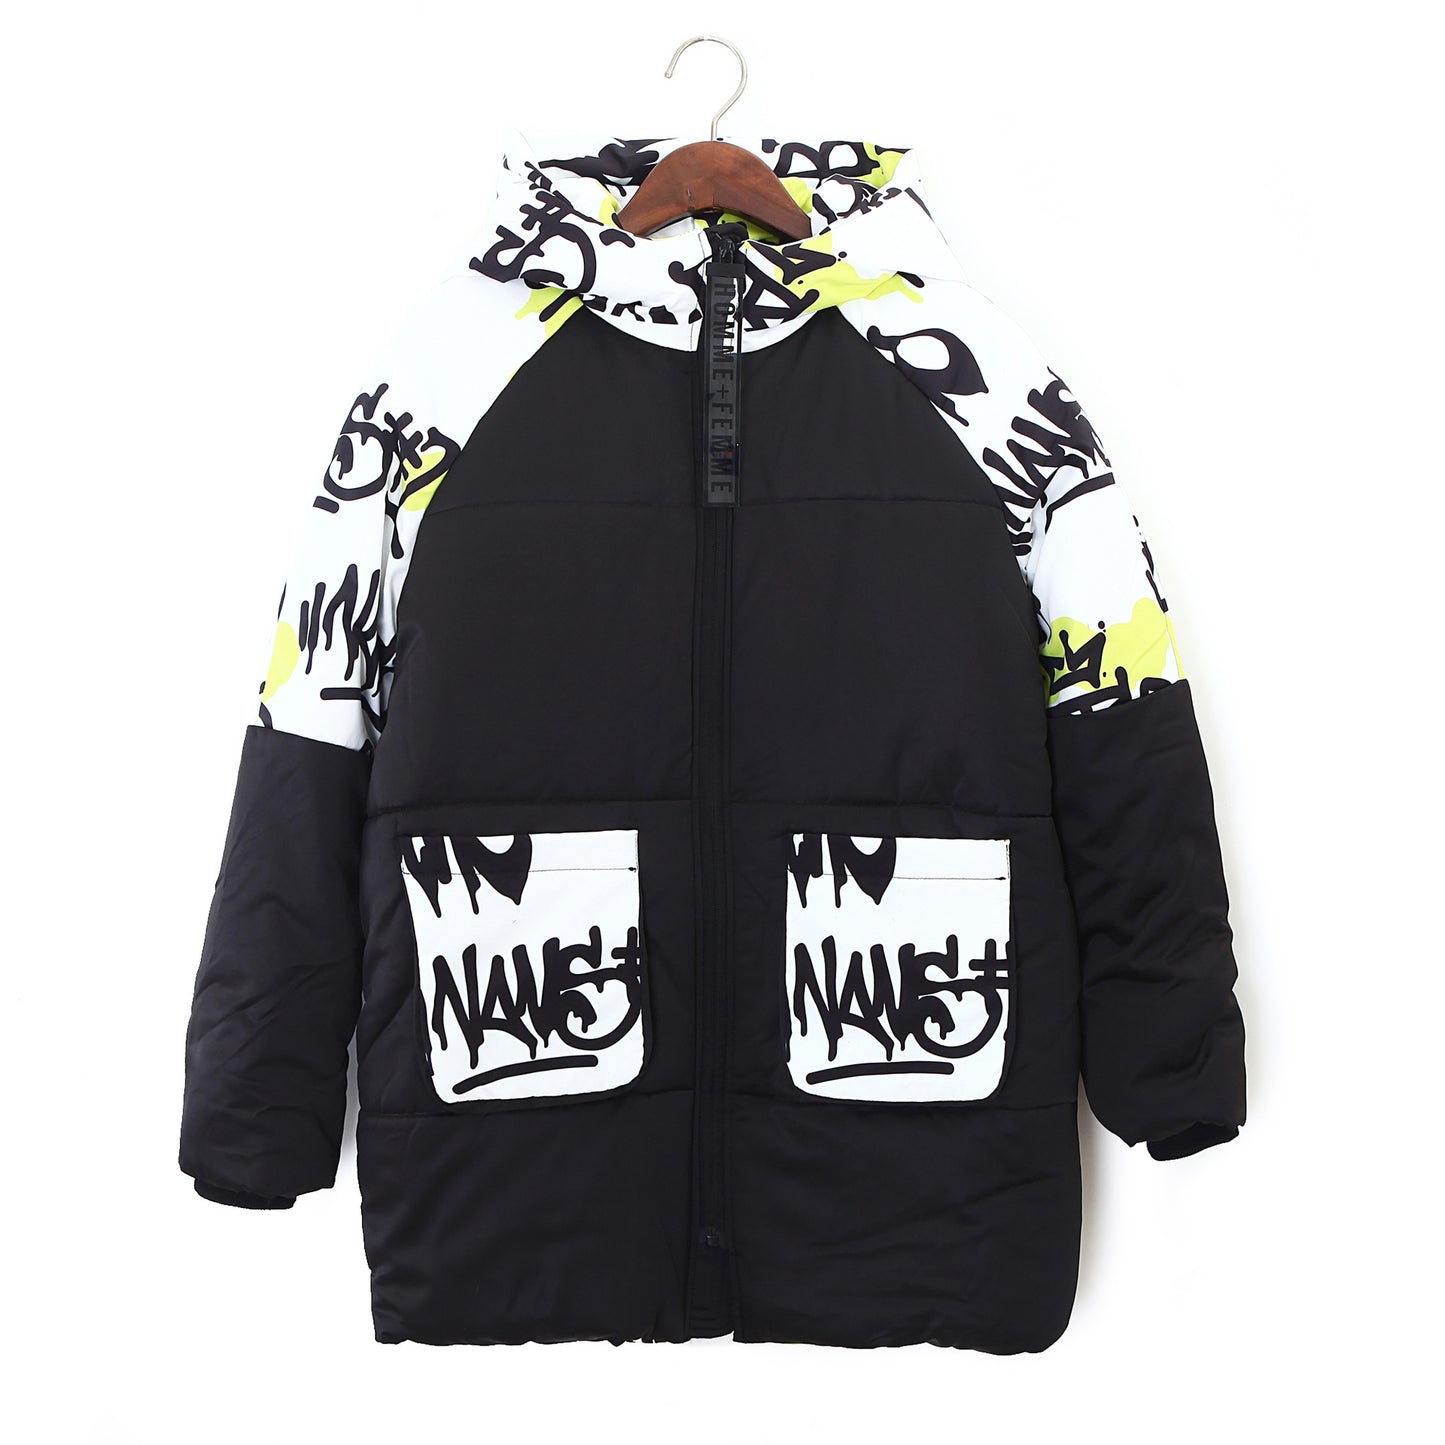 Streetstyle Hooded Jacket with Graffiti Print